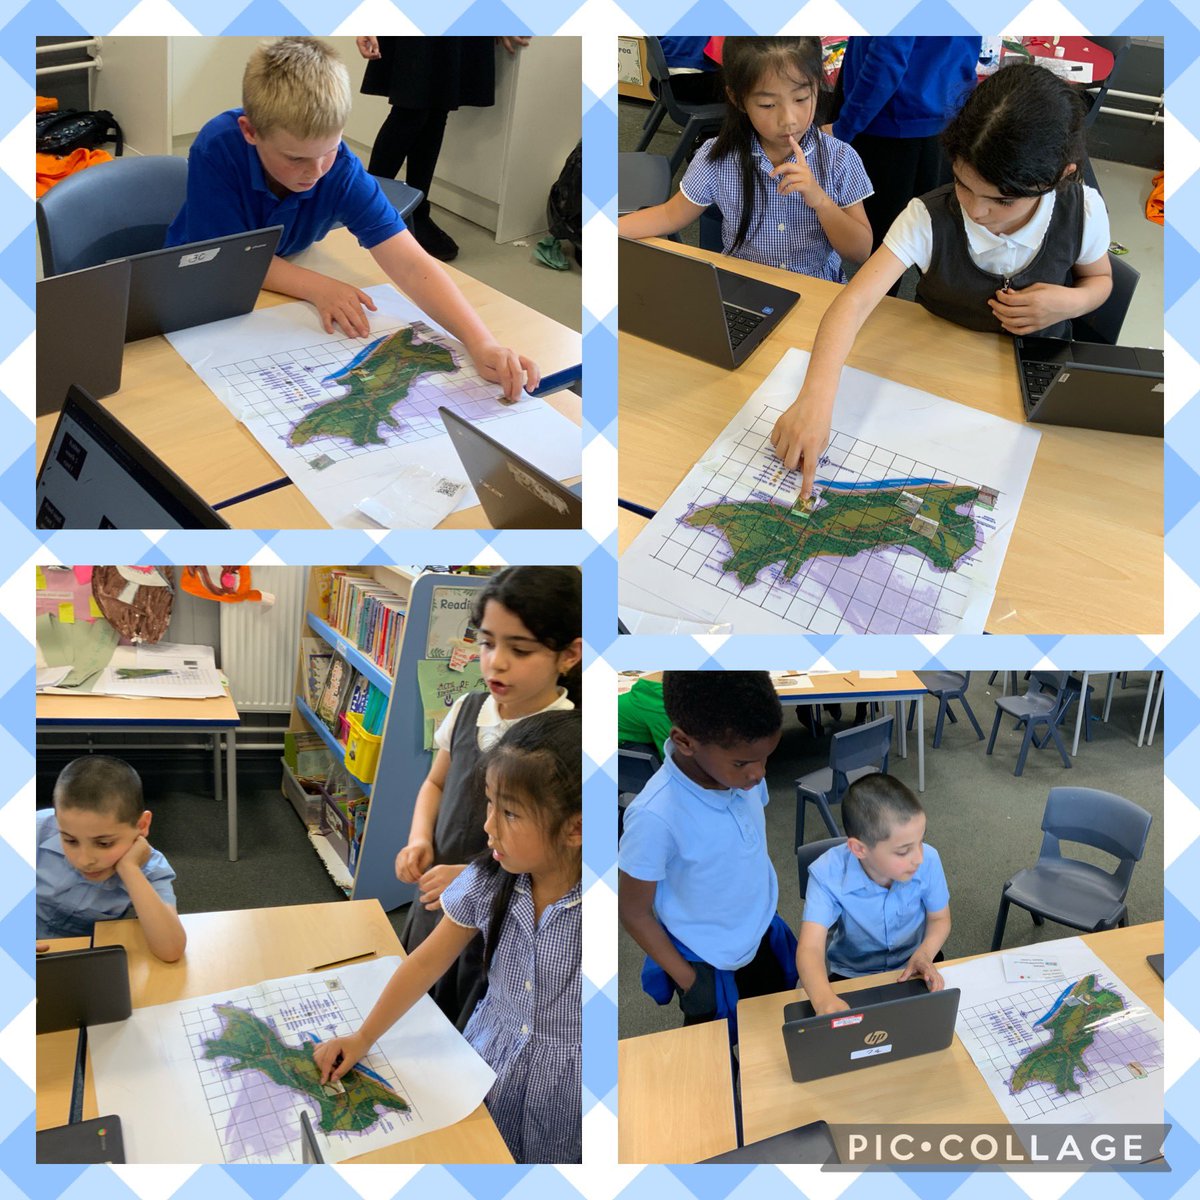 Year 3 have been using their mapping skills to give directions to get the bugs back to the right habitat. #nppschhumanities #nppschscienceandtechnology